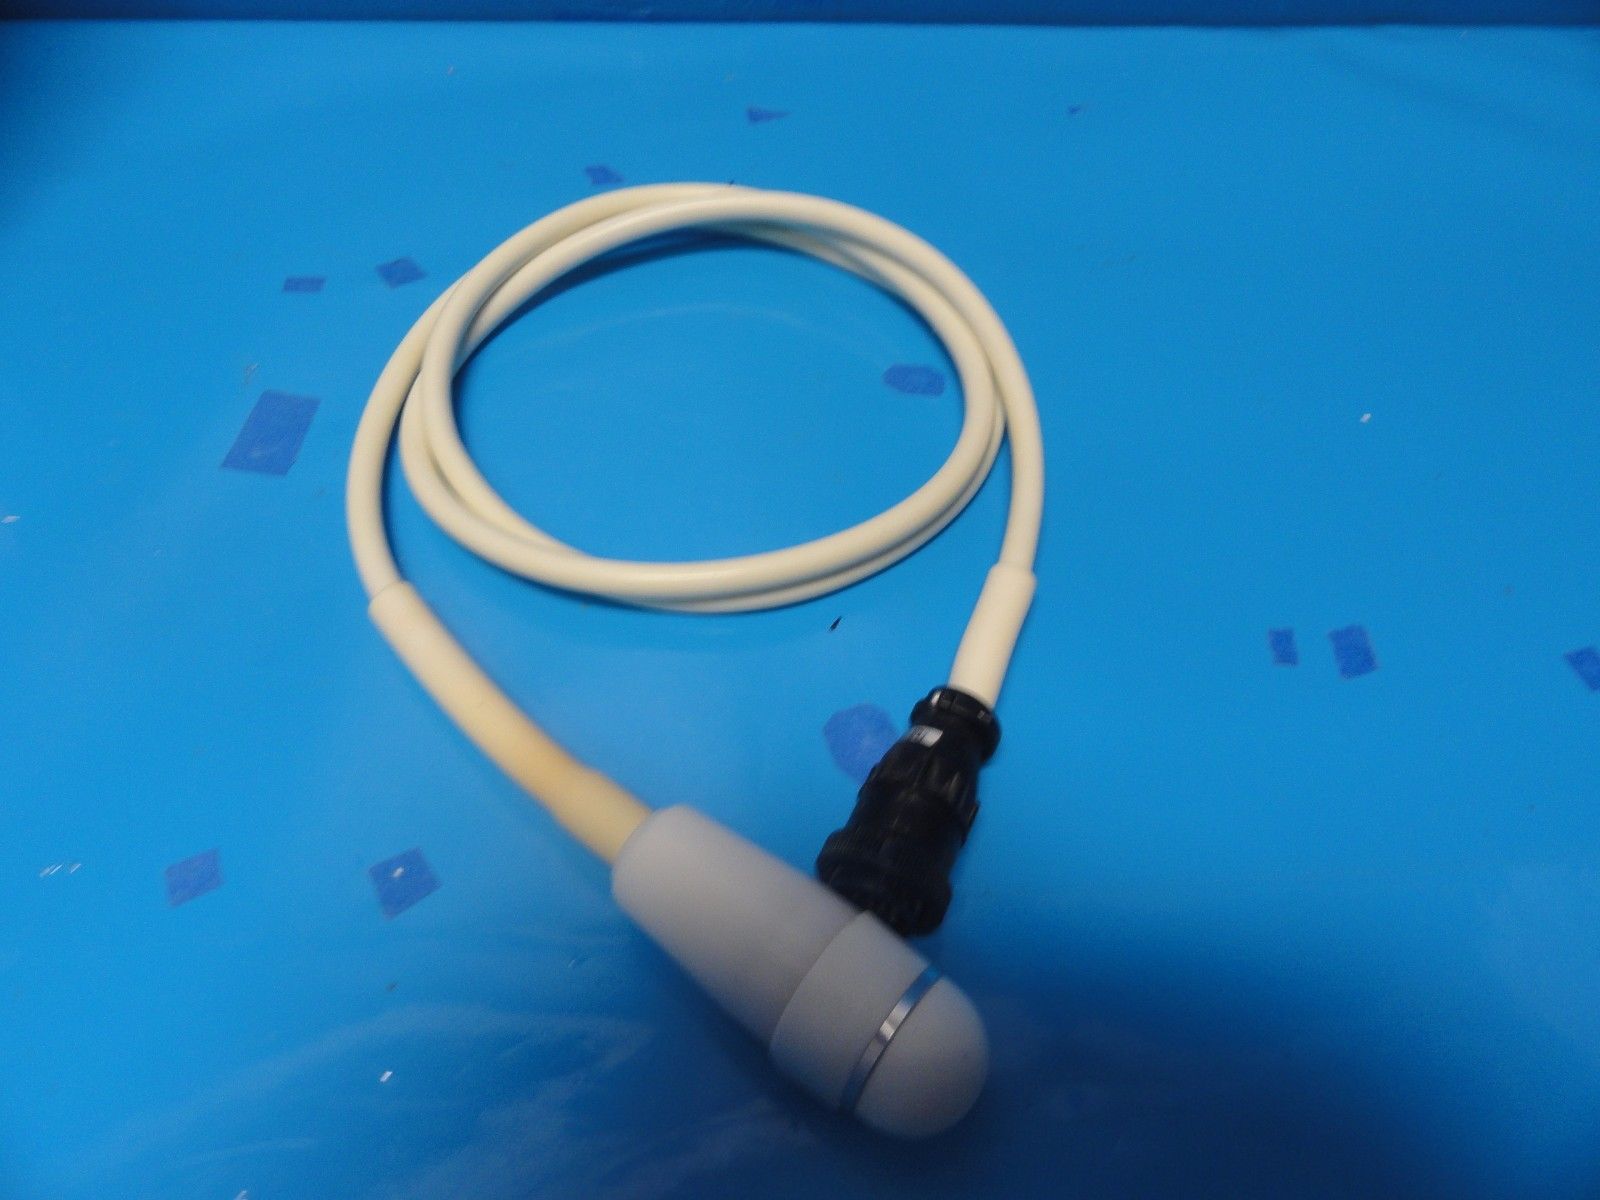 a white cord connected to a white cord on a blue surface